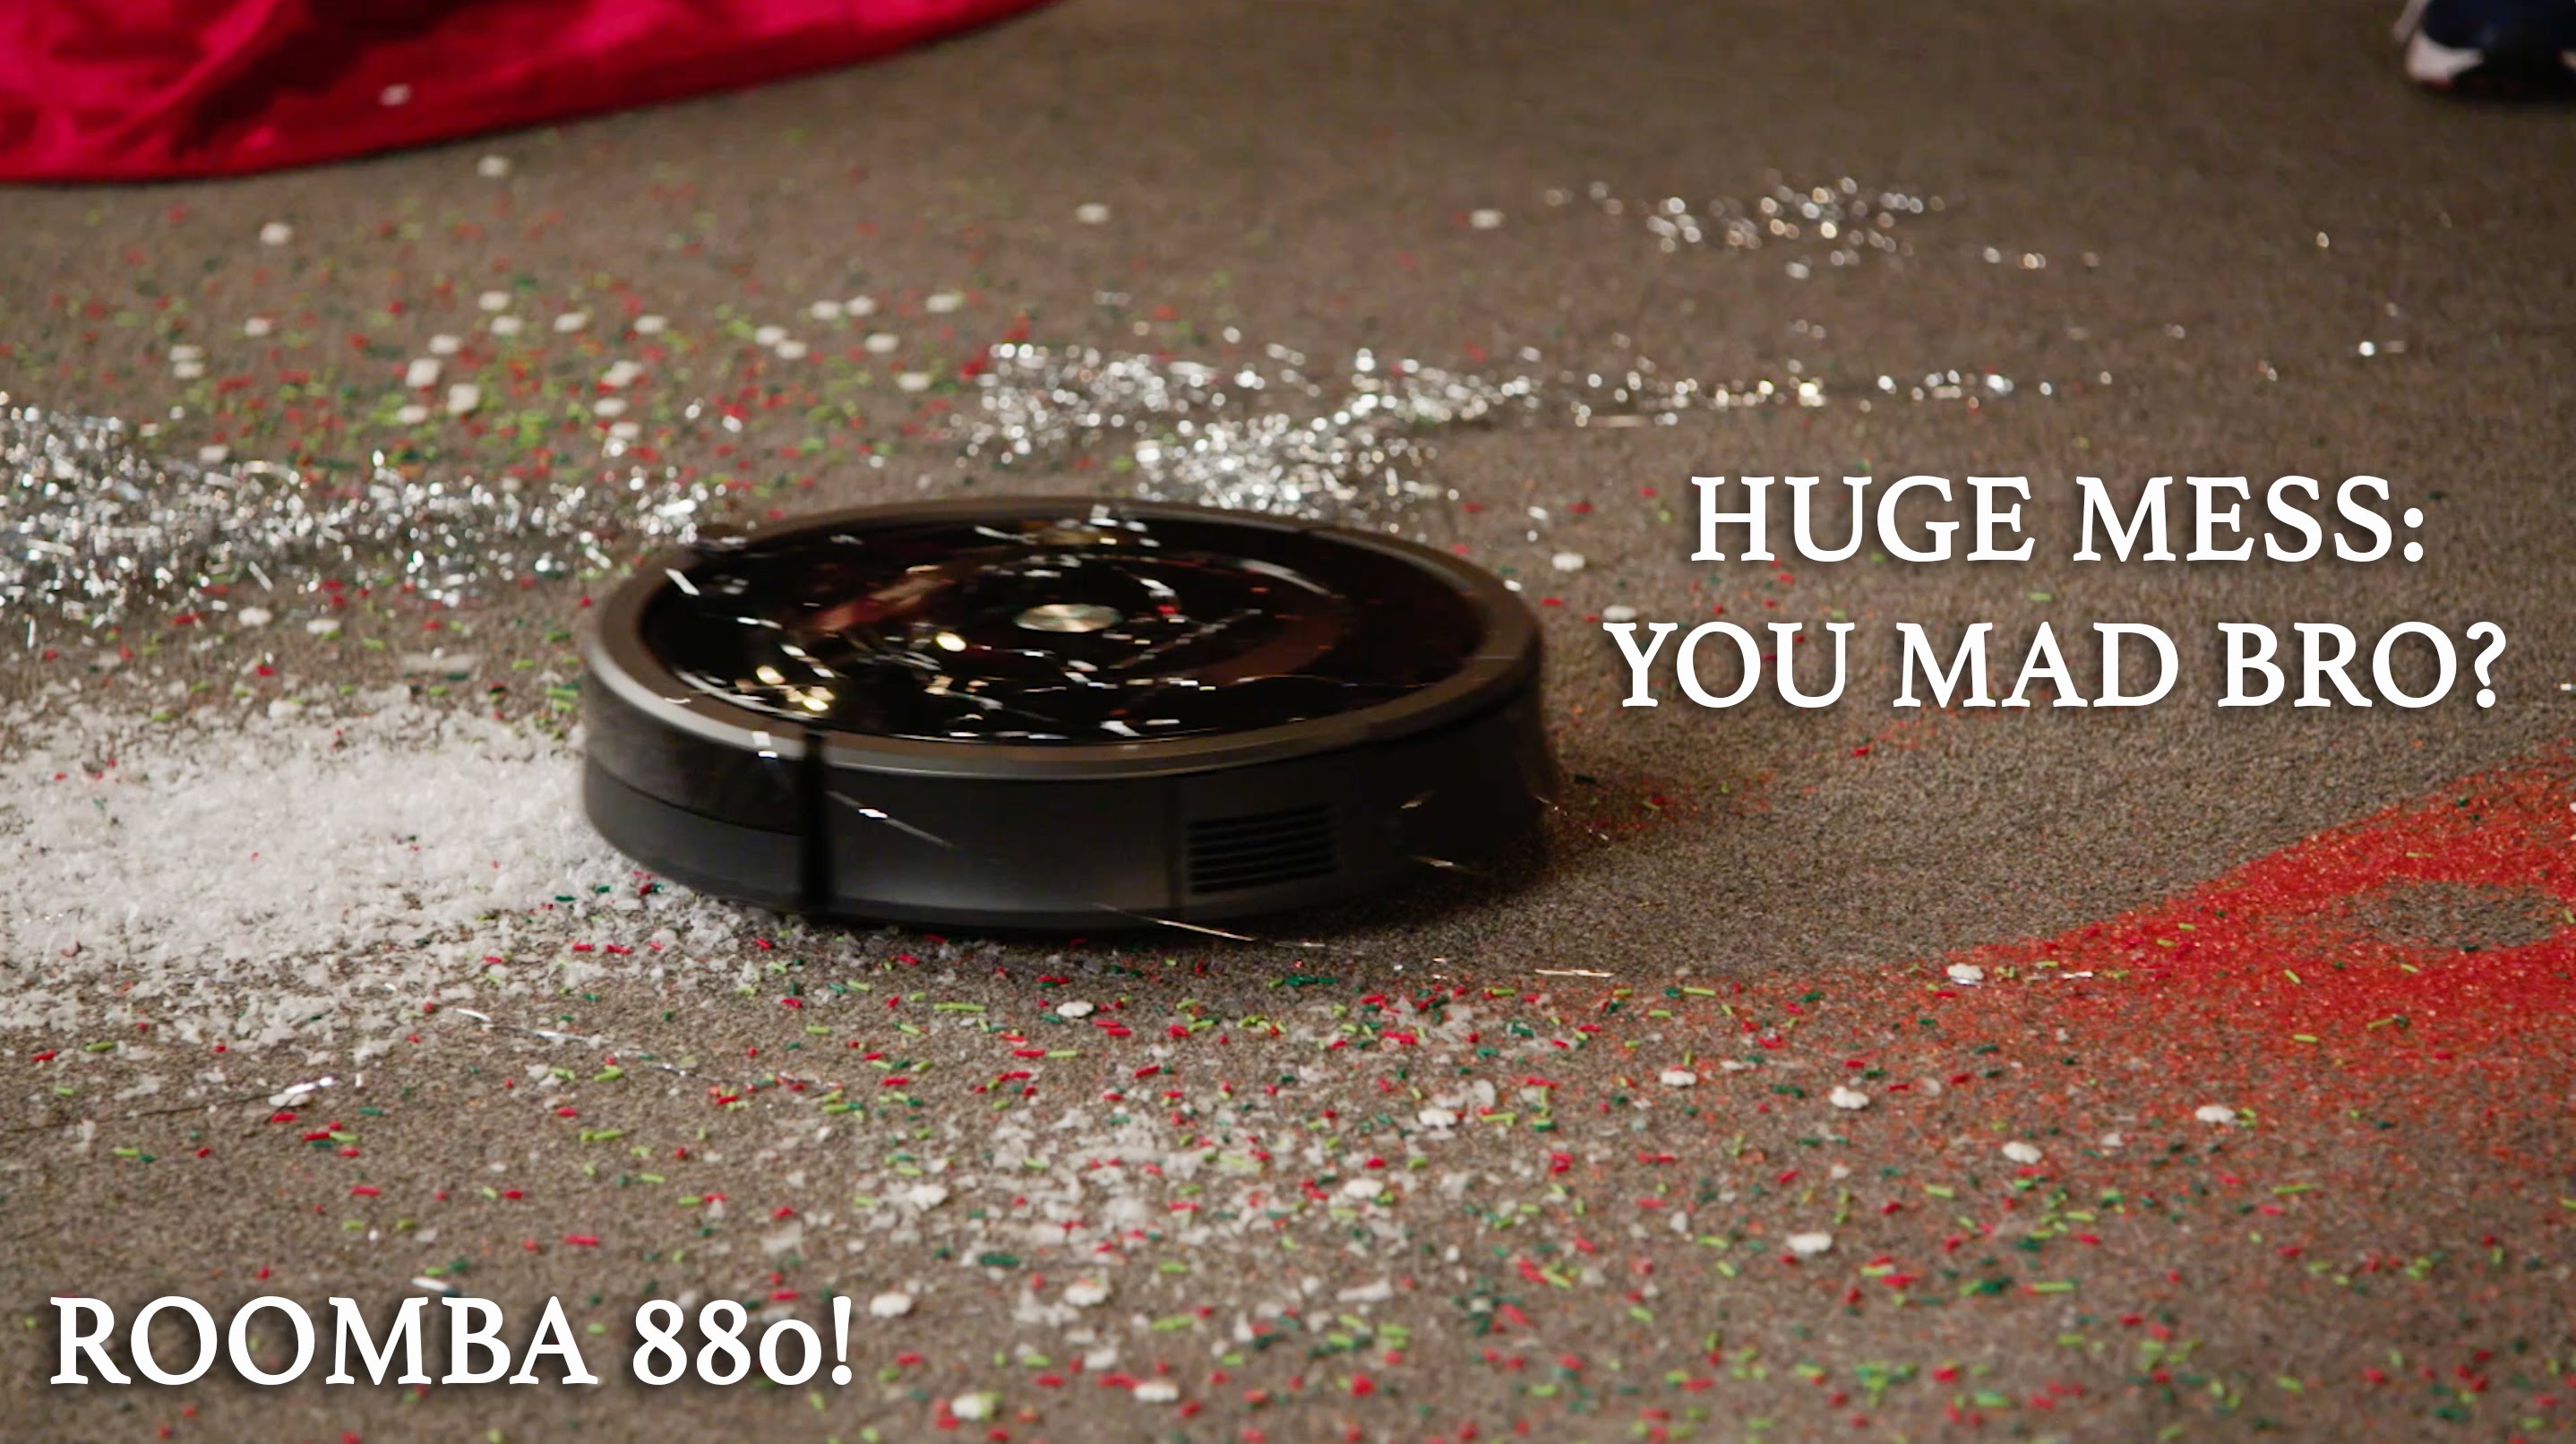 iRobot Roomba 880: Did It Clean The Huge Mess? || AWESOME STUFF WEEK: GIFT GRAB